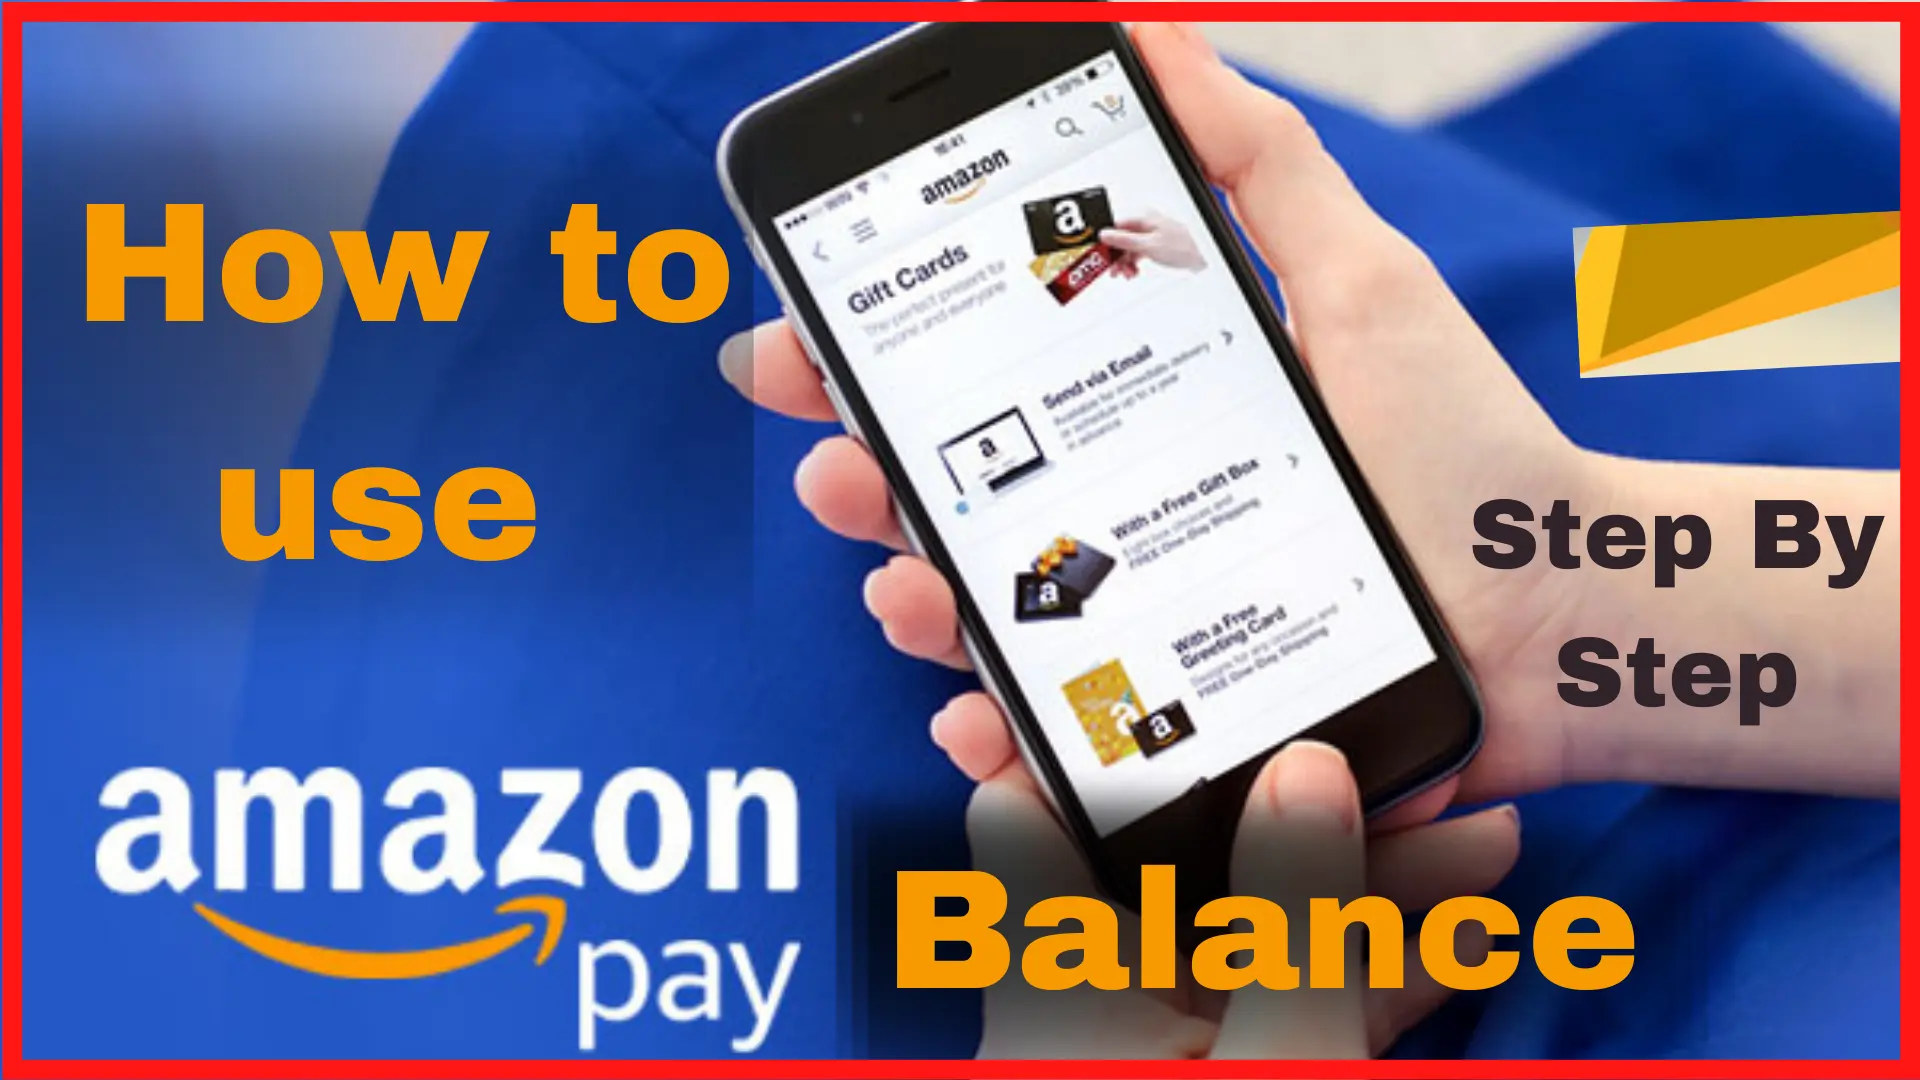 How to Use Amazon Pay Balance #4 Best tricks